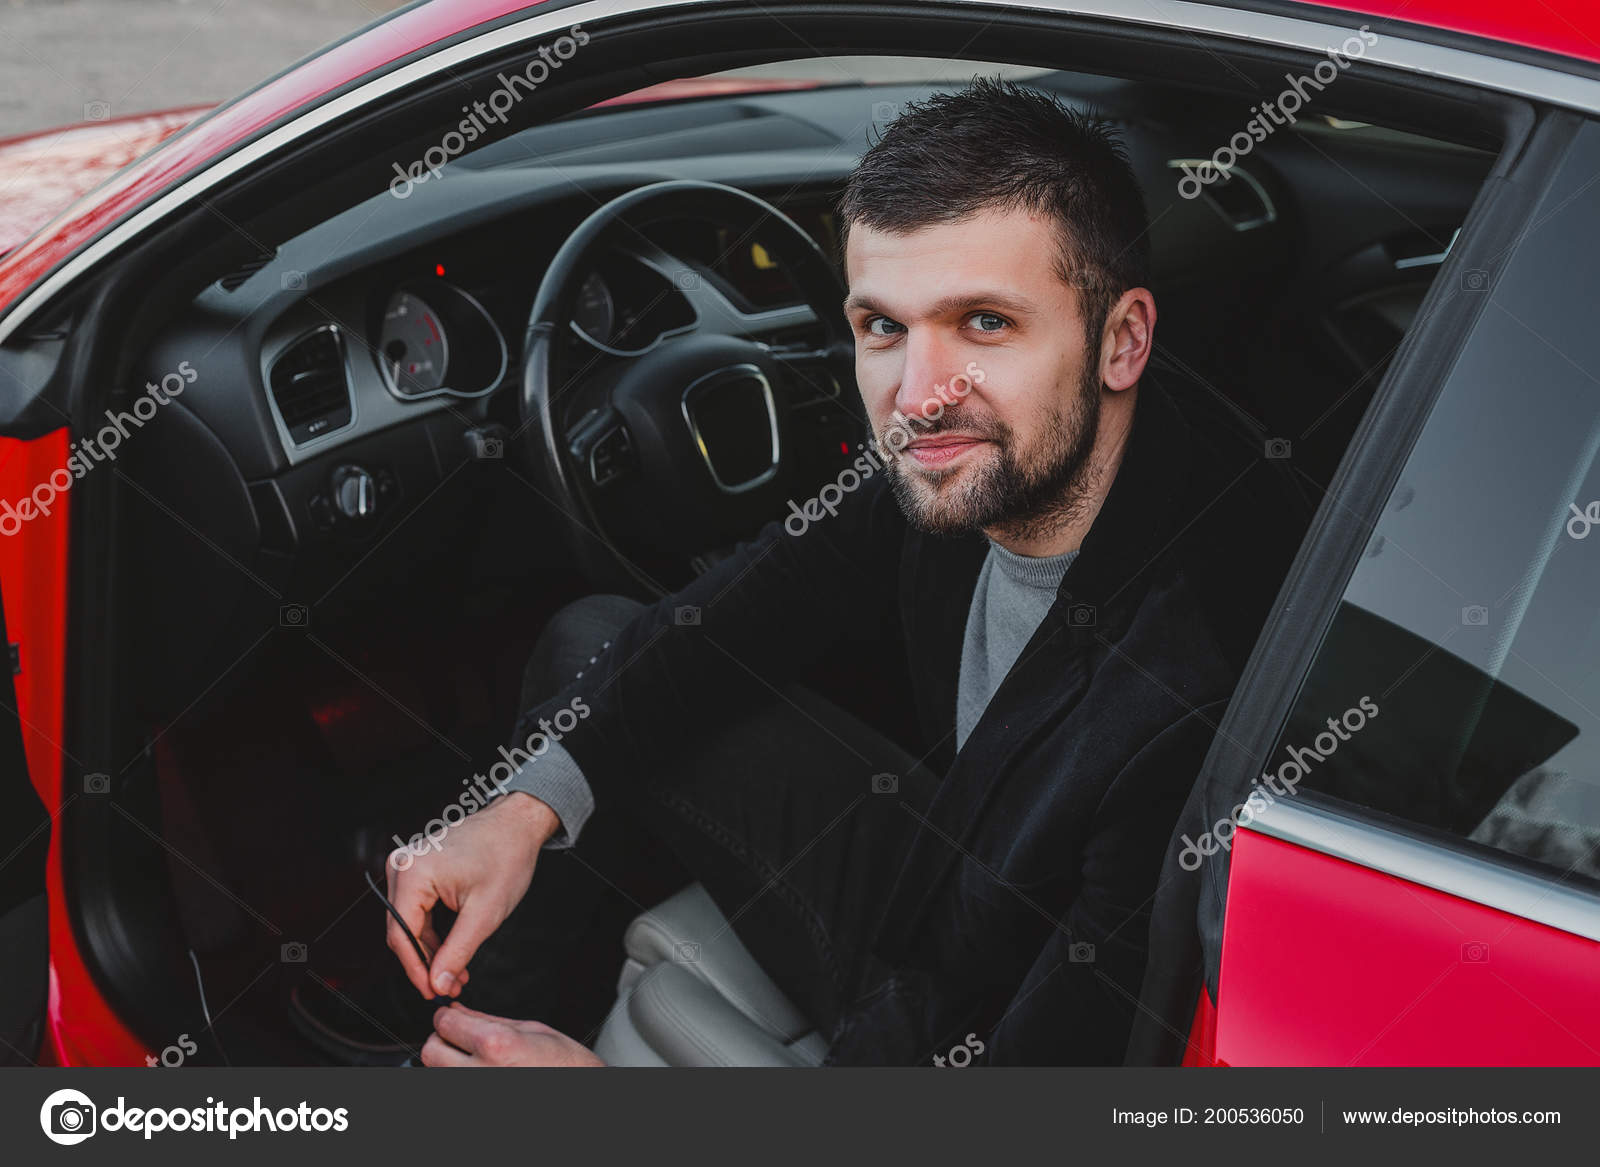 Inside car photography pose reference | Photography poses for men, Inside  car, Men cars photography